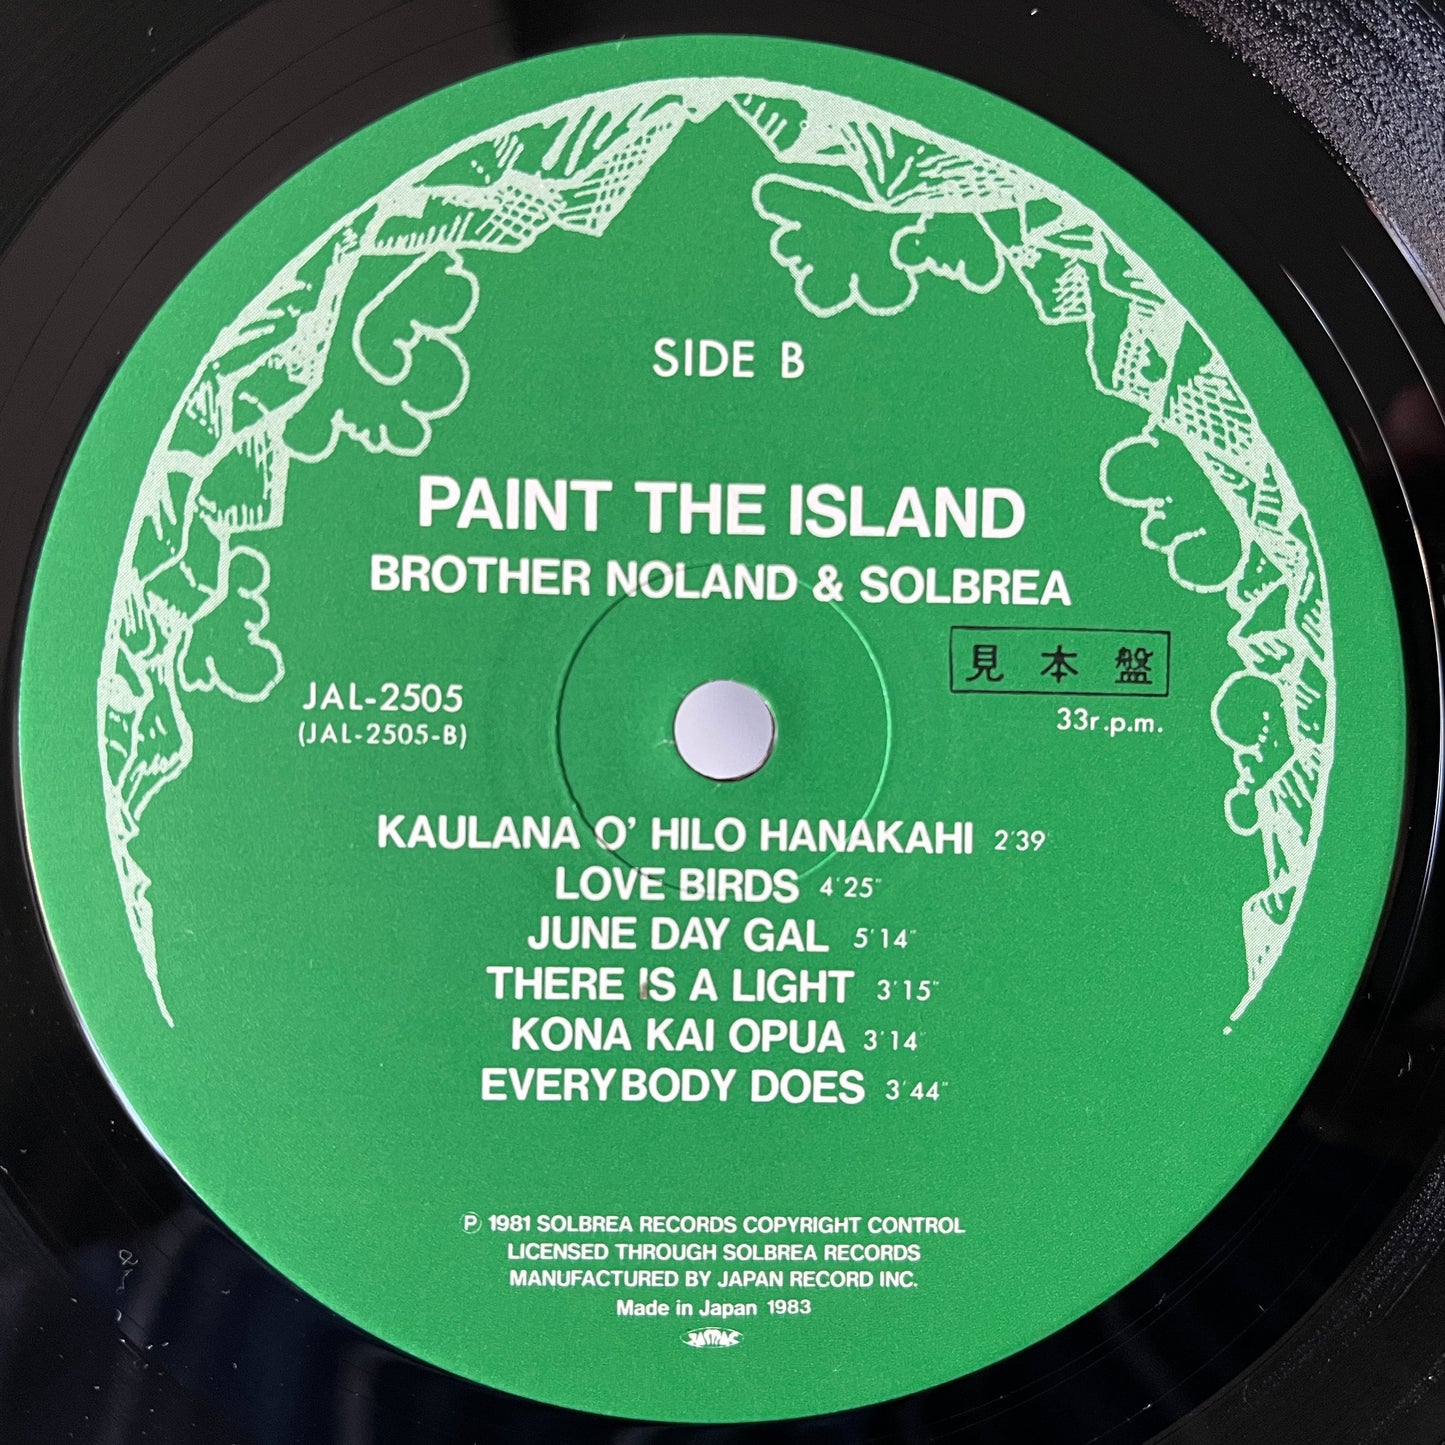 Brother Noland & Solbrea – Paint The Island